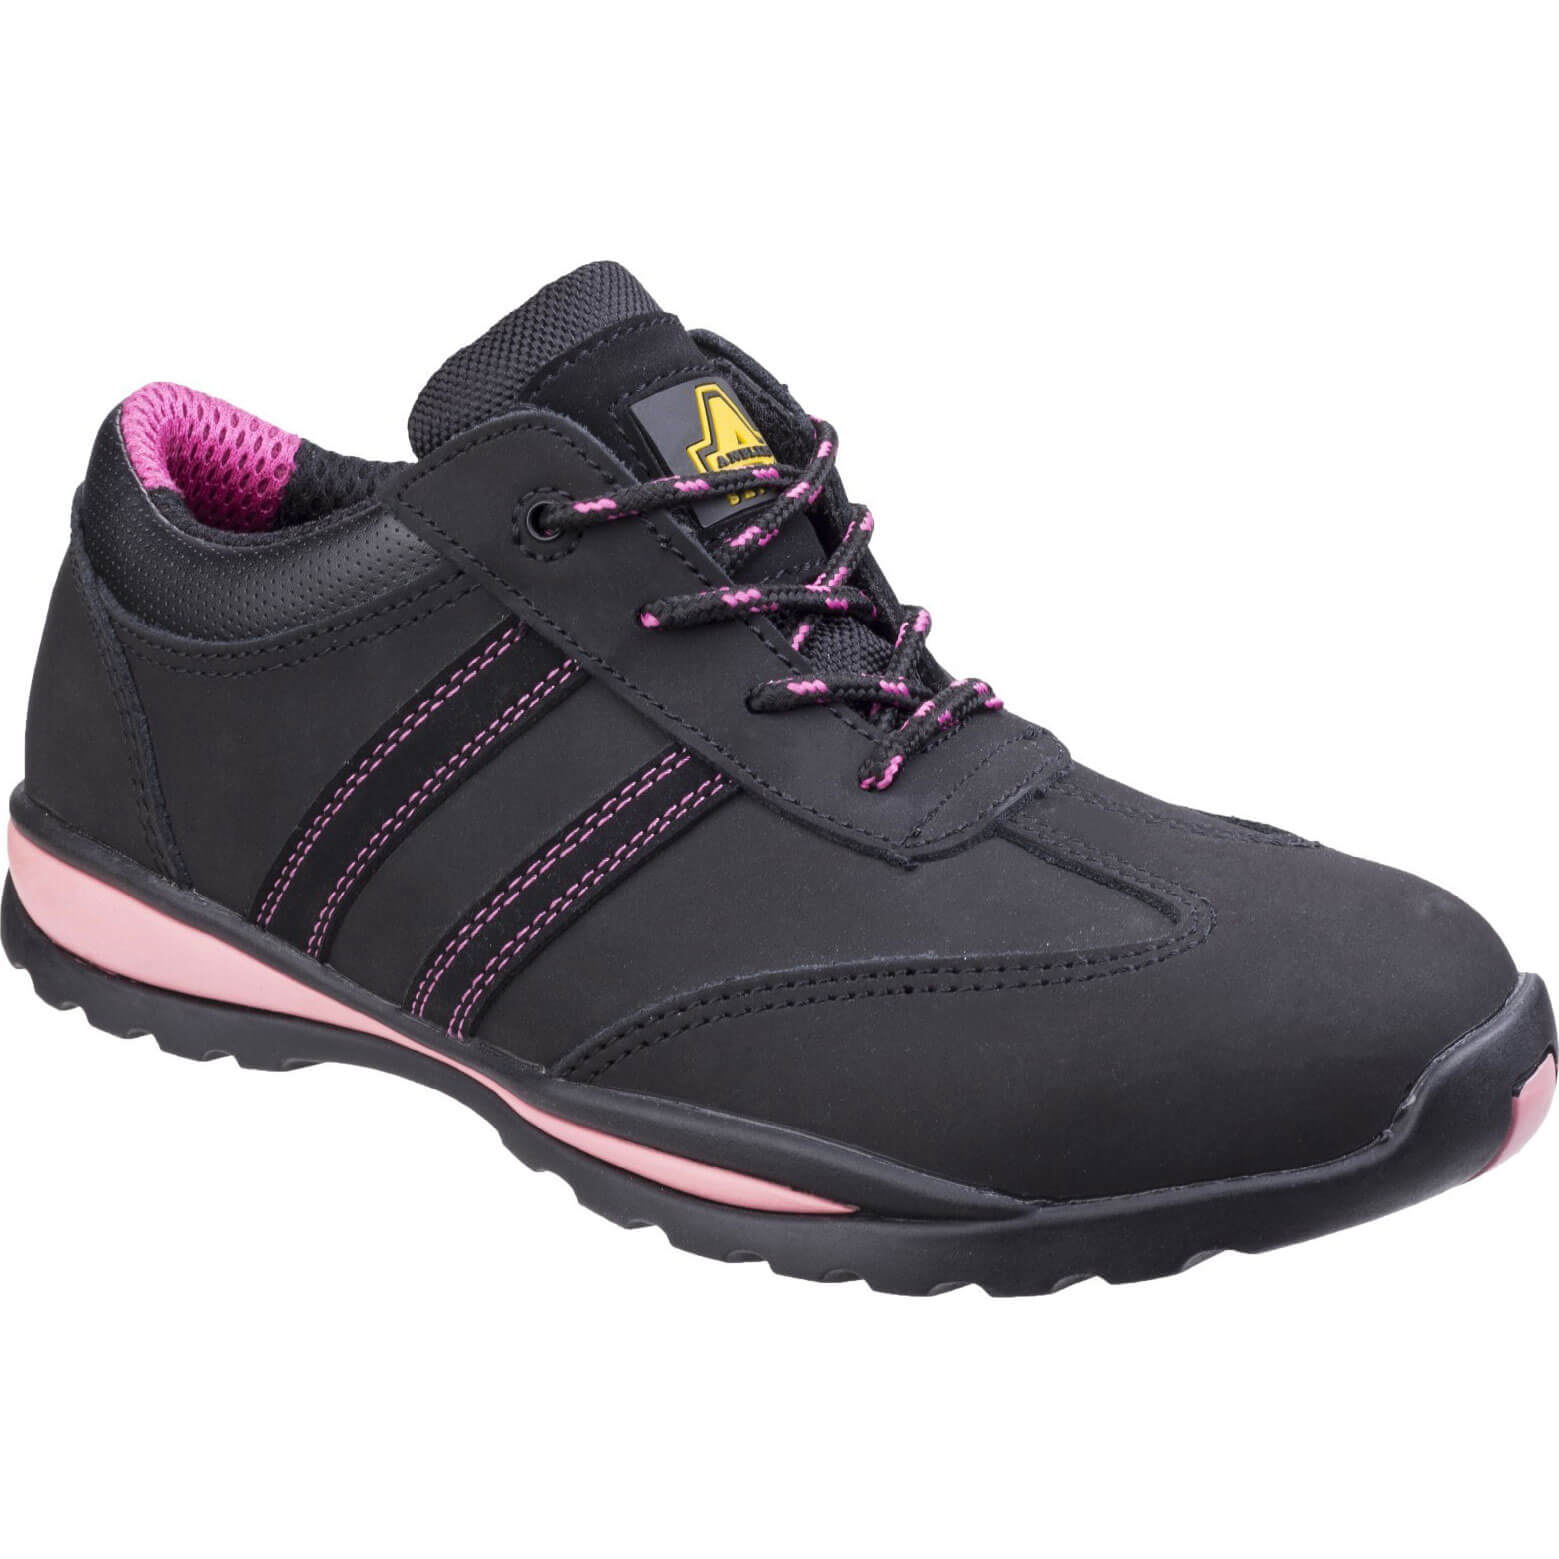 Image of Amblers Safety FS47 Heat Resistant Lace Up Safety Trainer Black / Pink Size 3